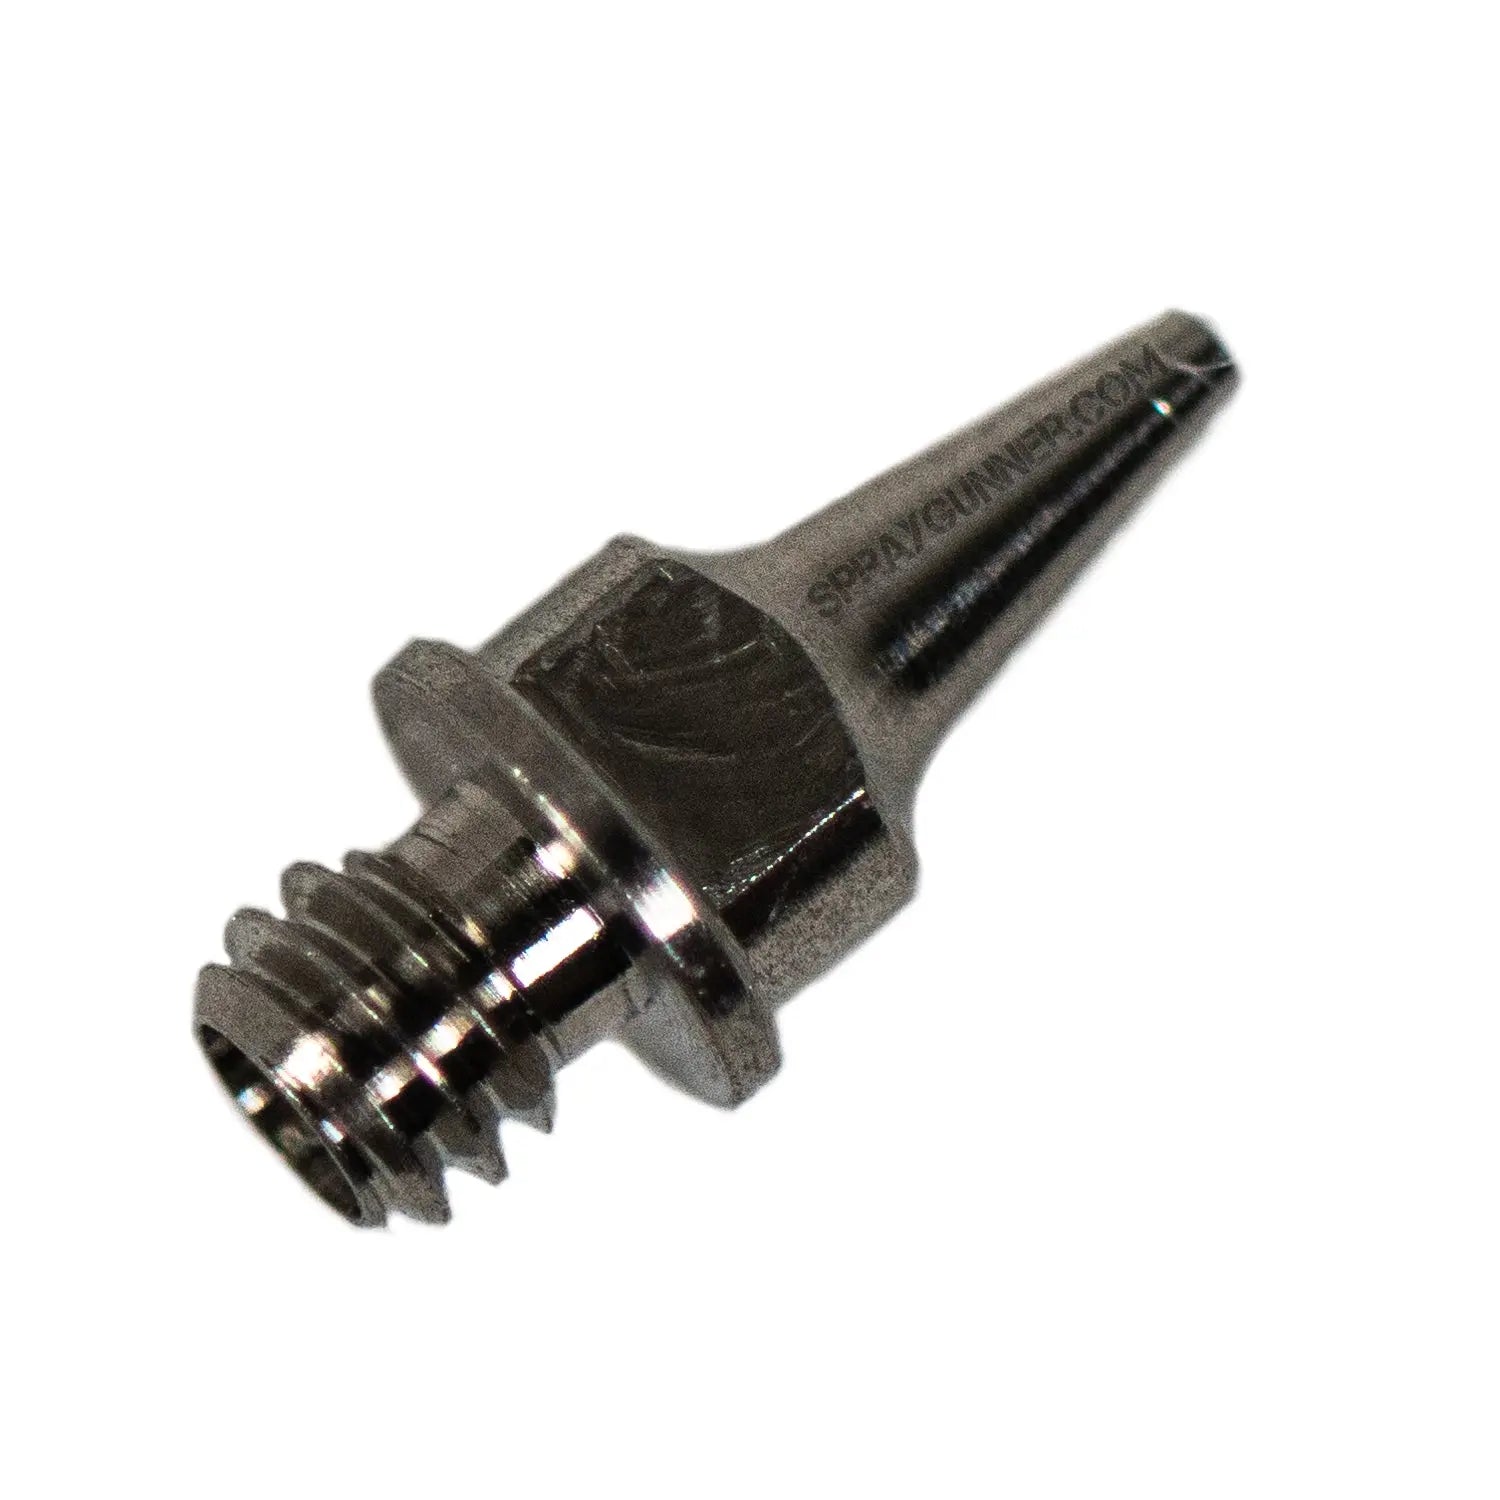 Nozzle 0.3mm for PS-265 GSI Creos Mr. Hobby